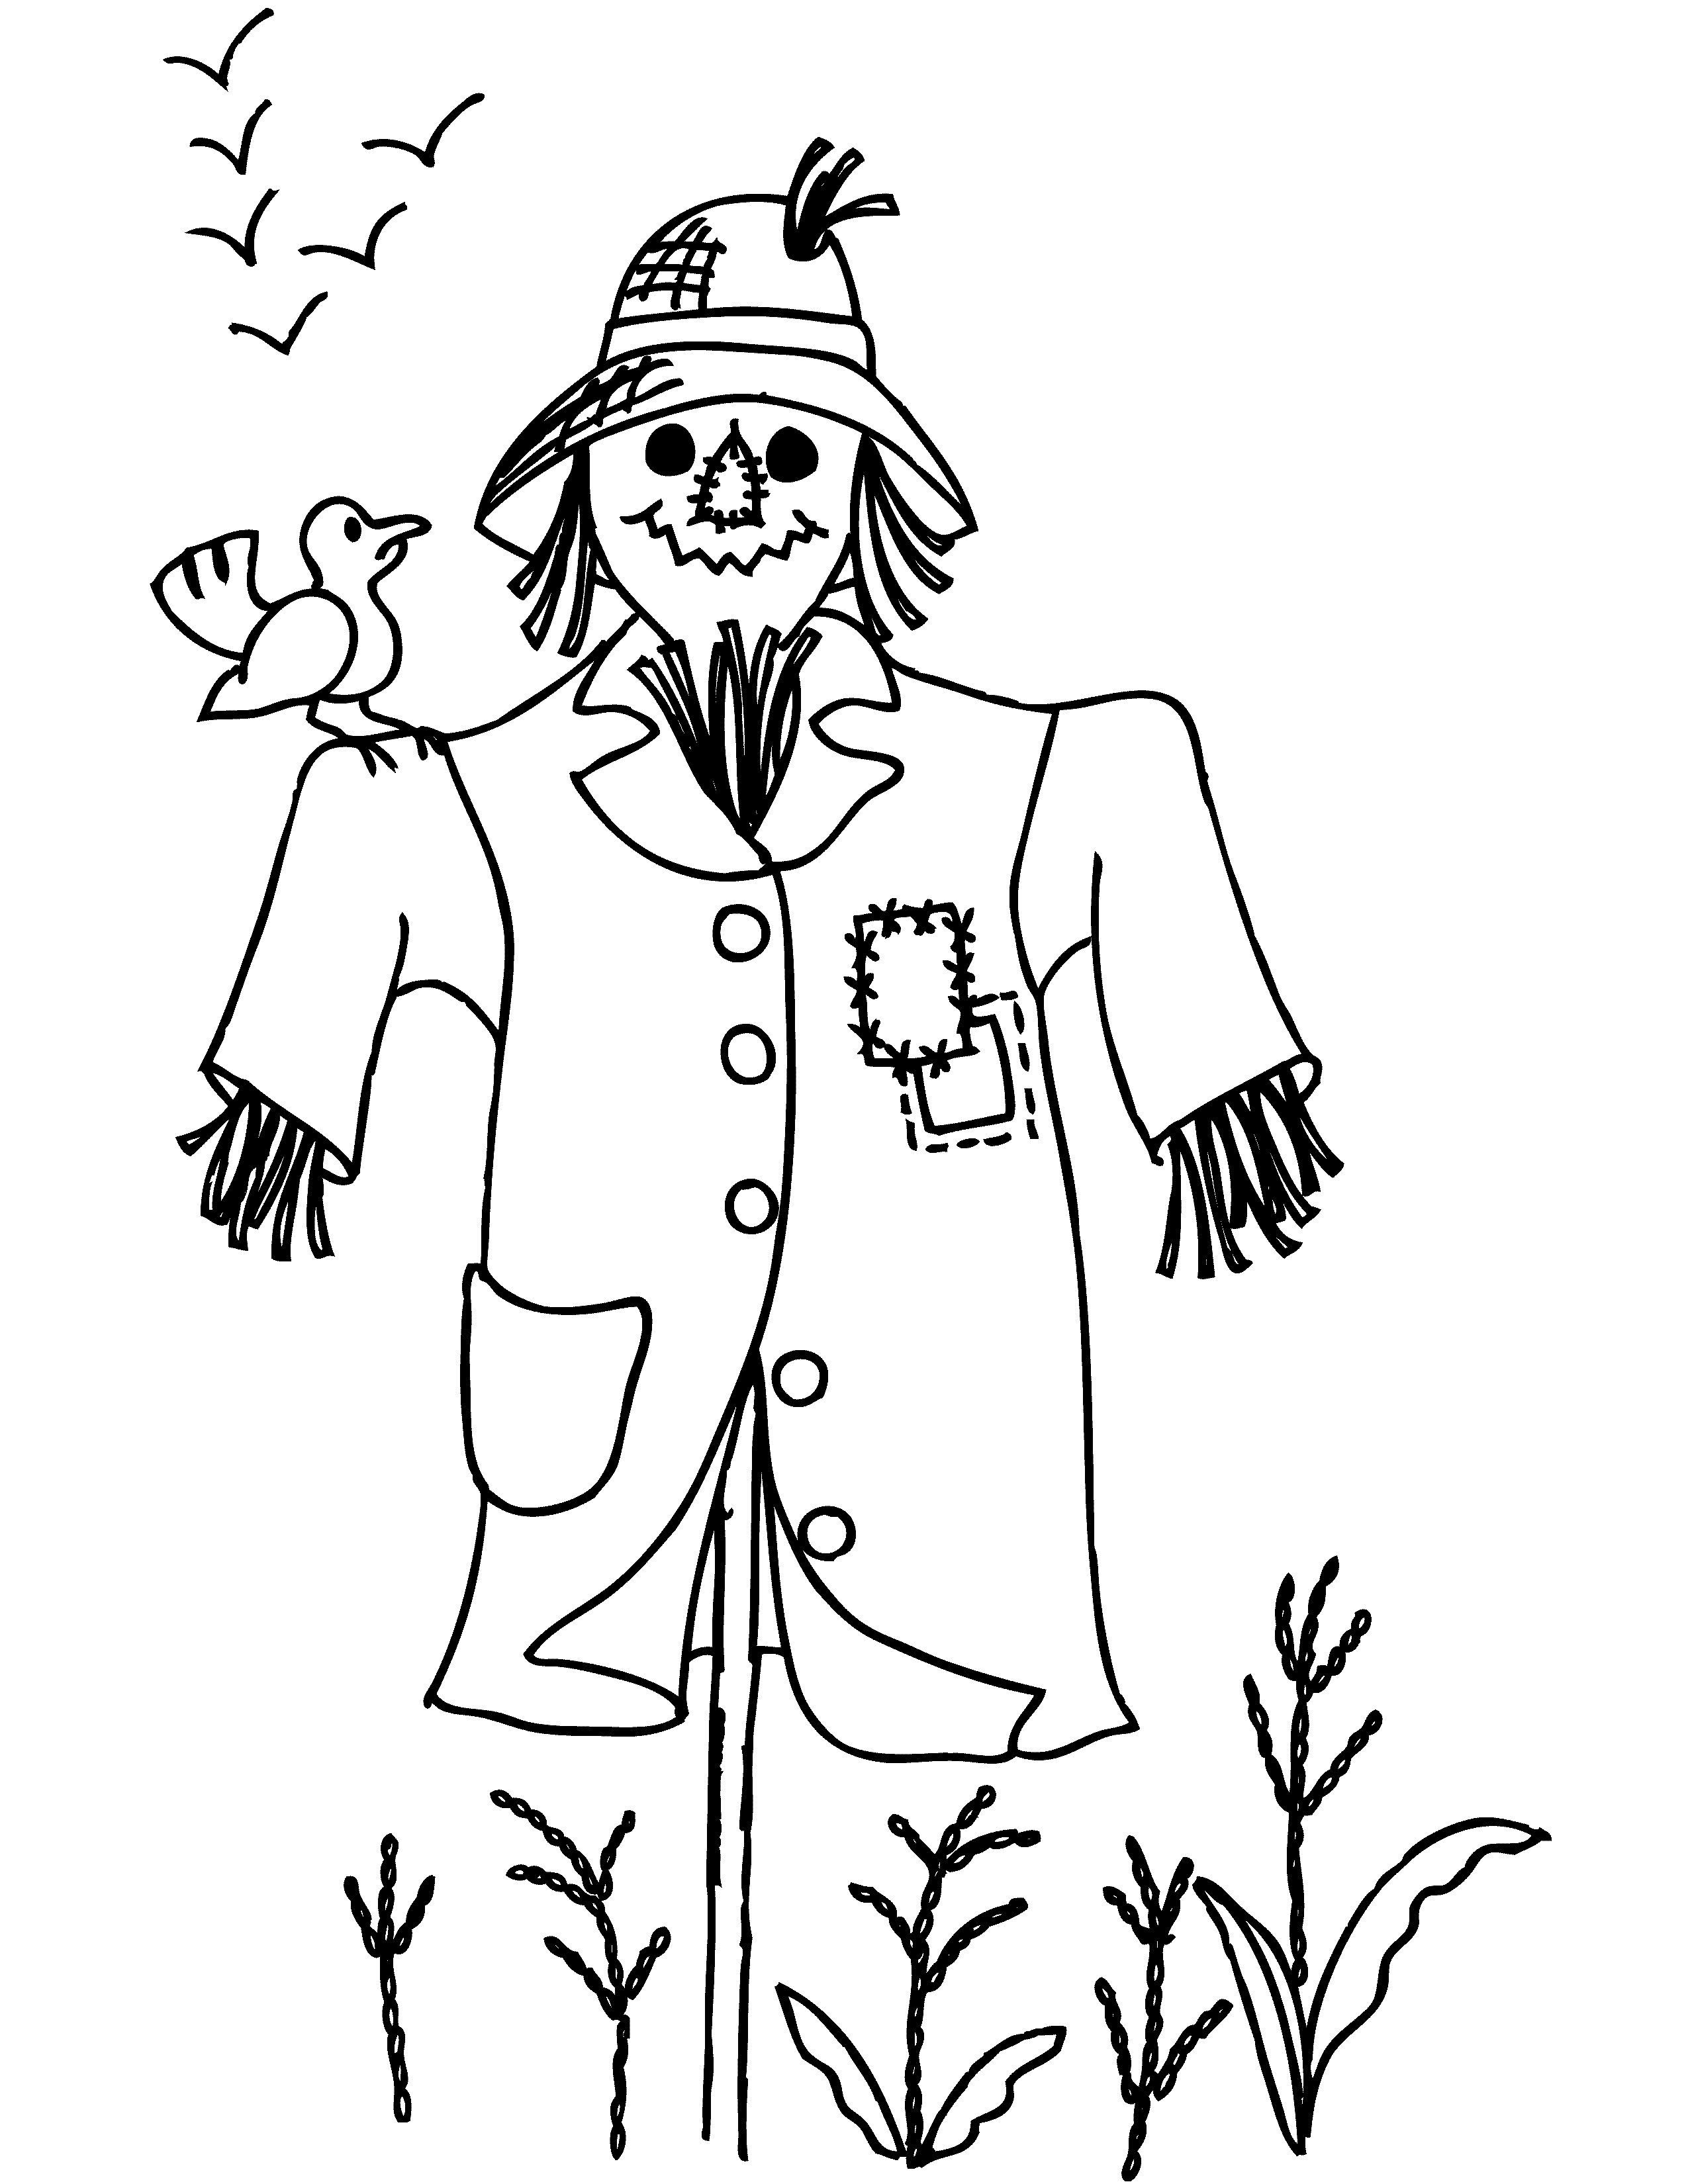 Free black and white scarecrow clipart.